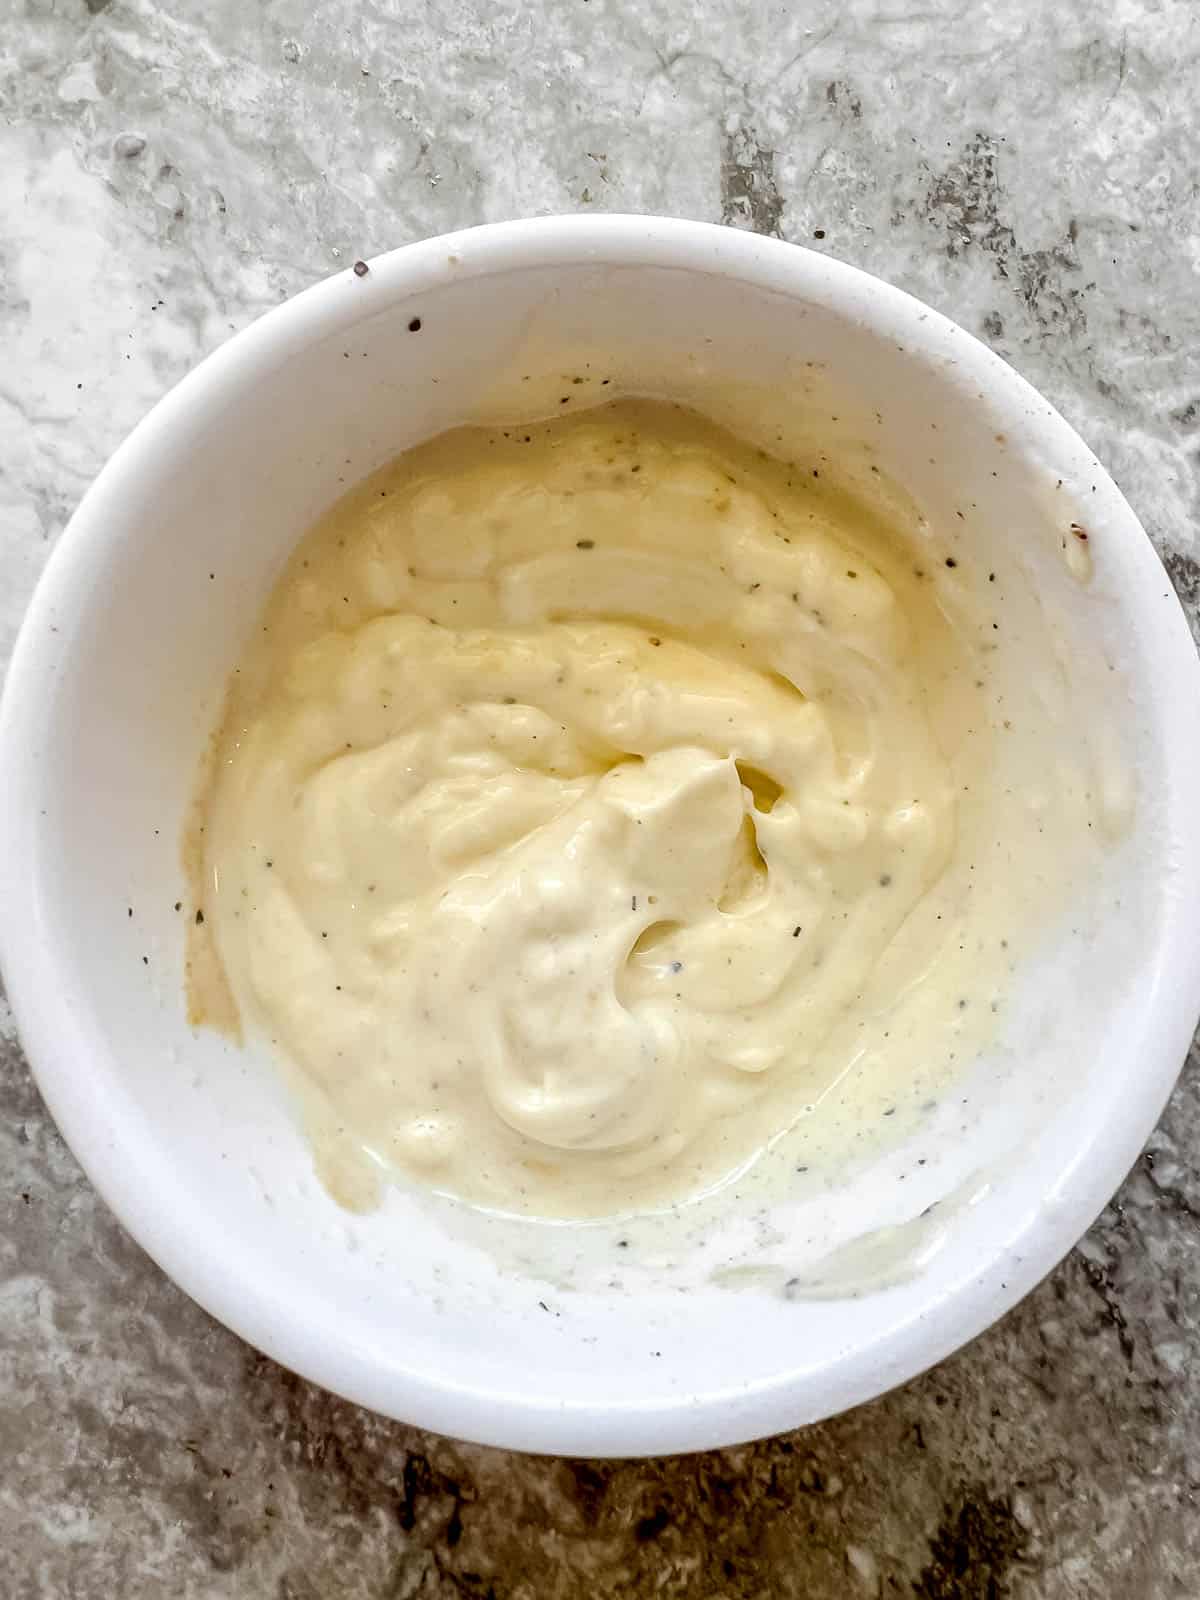 Mayonnaise sauce in a bowl.